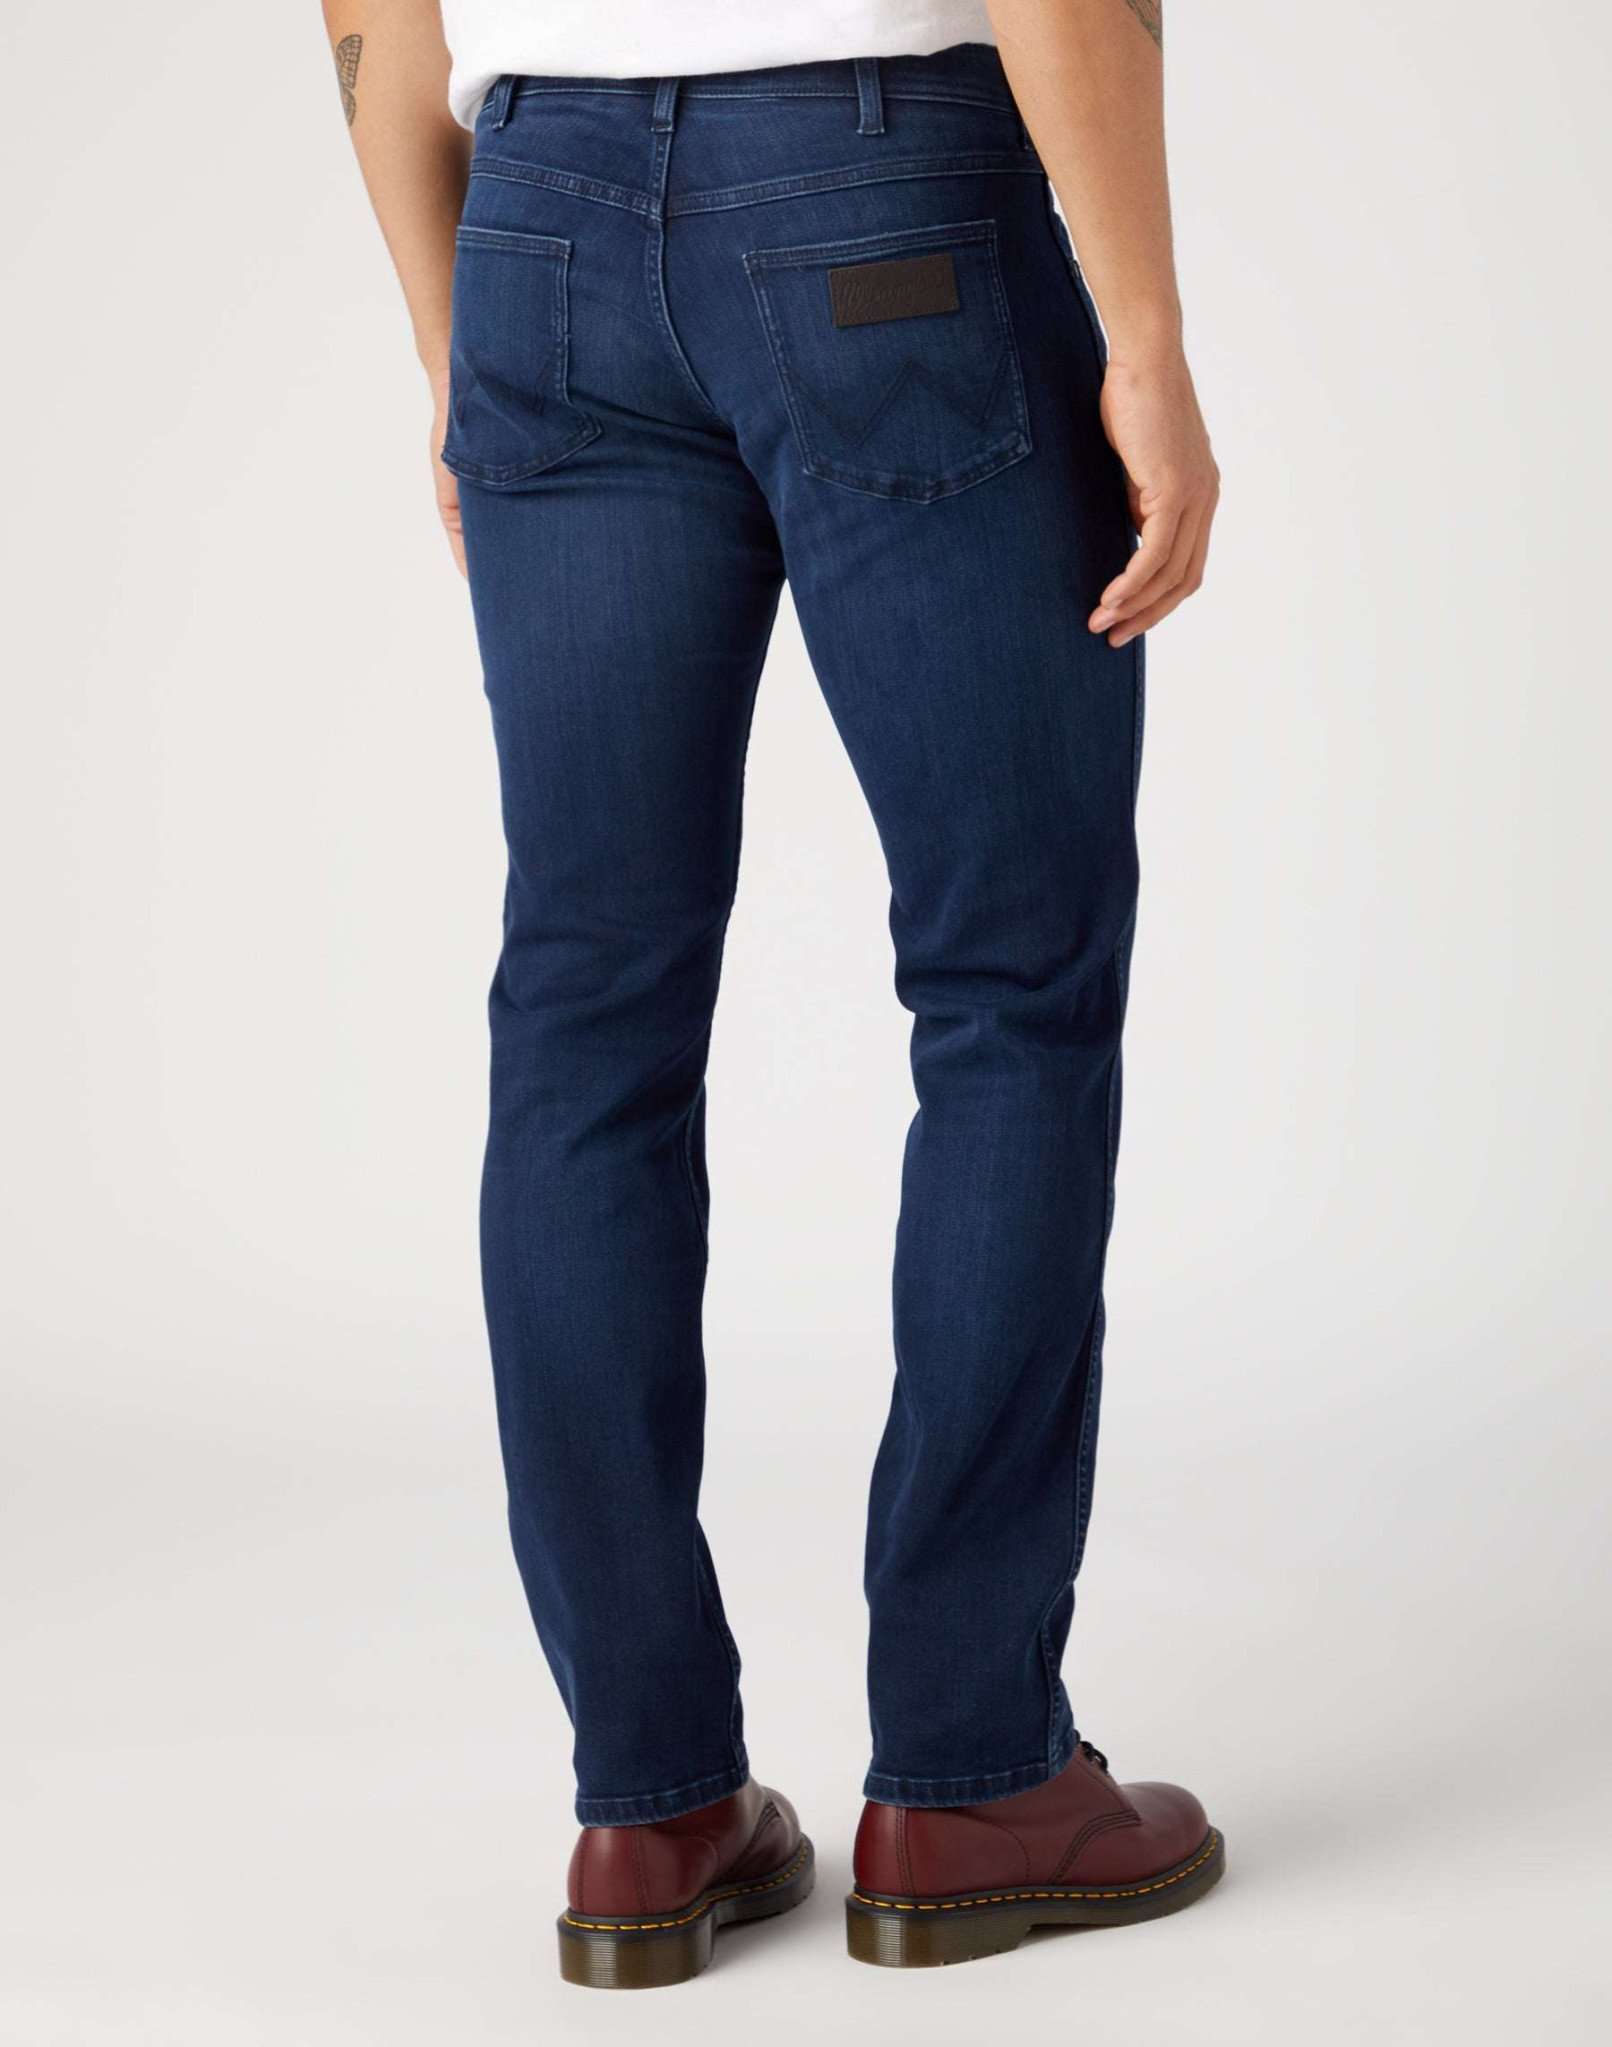 Greensboro in Arm Strong Jeans Wrangler   